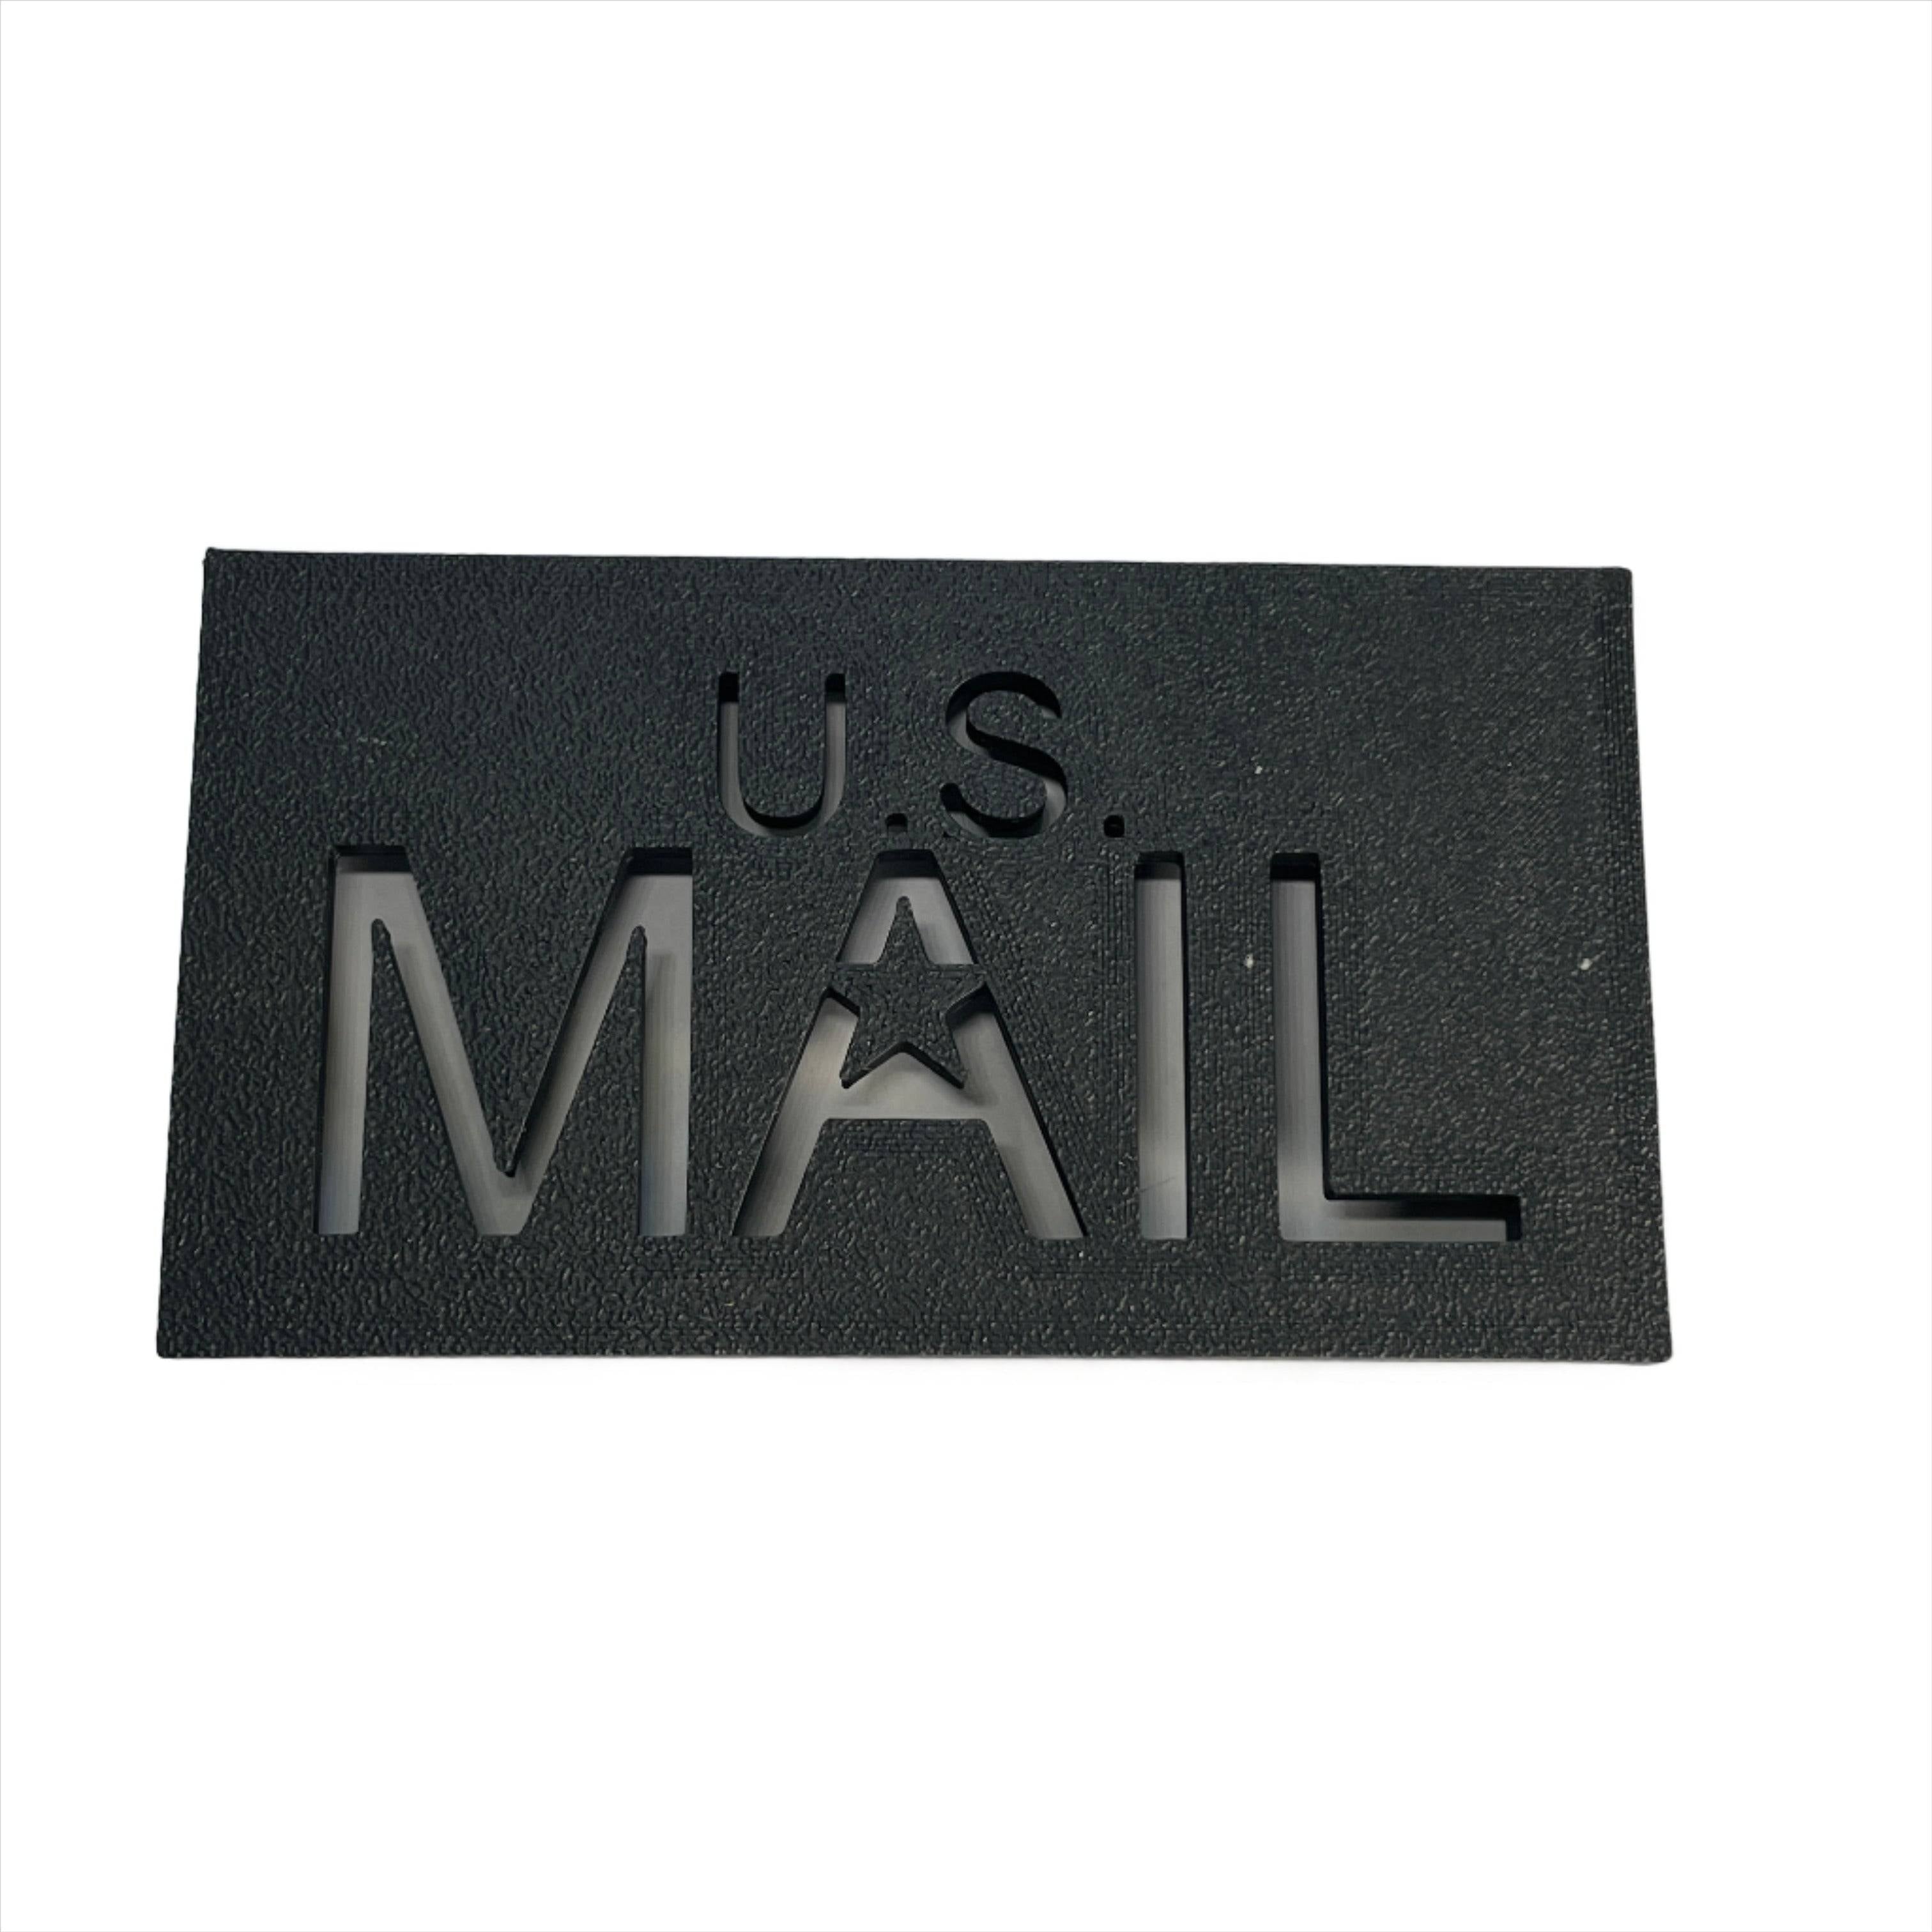 black front for mailbox flag for brick or stone mailboxes. Go incognito with this color, or use it in solidarity or to celebrate black history month. Be unique with this custom mailbox flag.